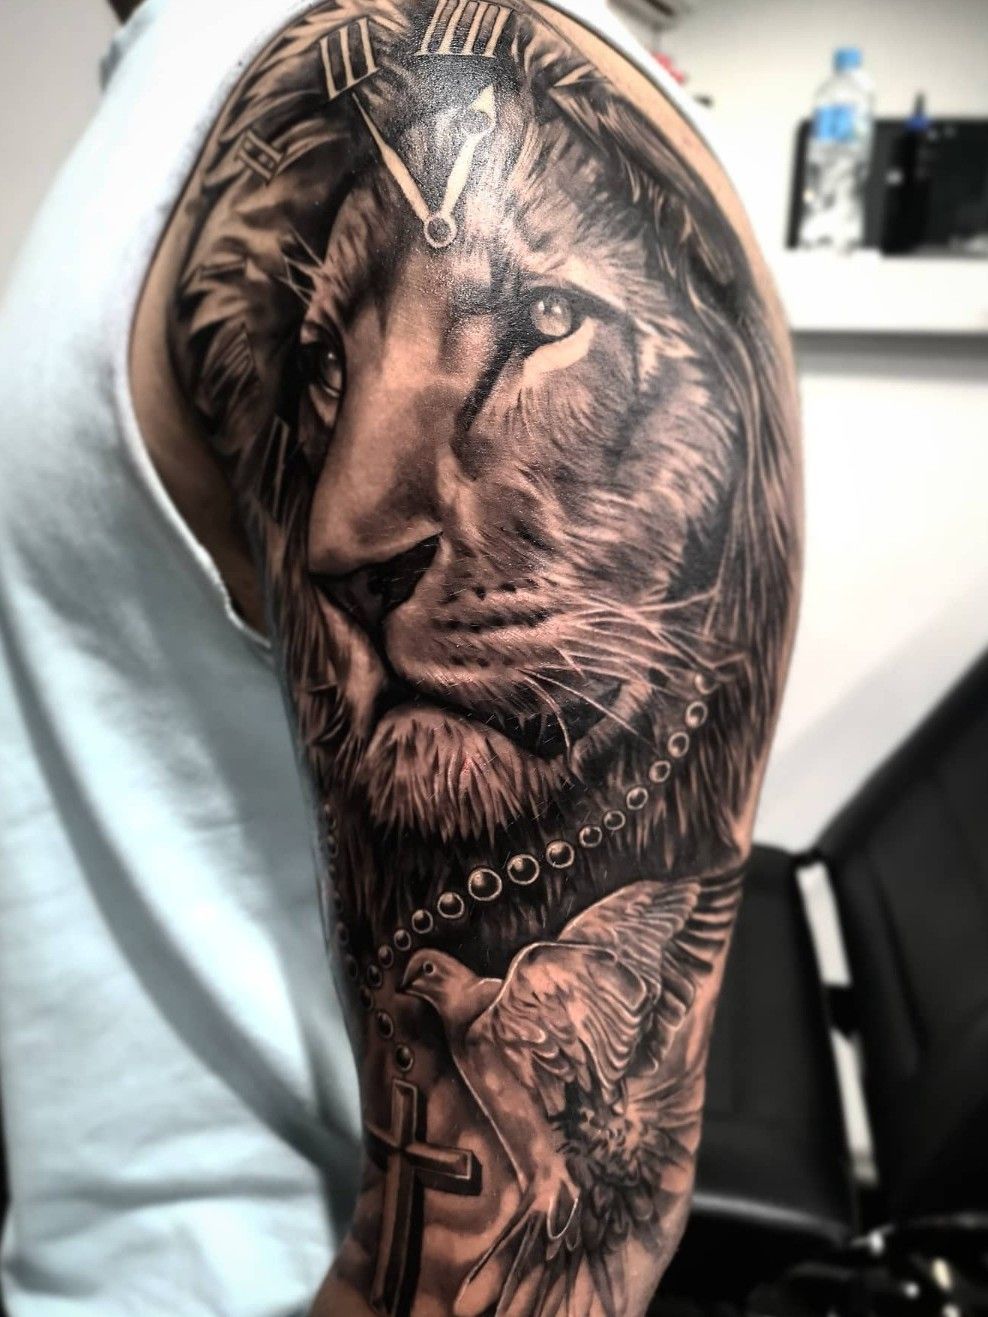 Armor of God and Lion of the tribe of Judah  Lion tattoo Lion hand tattoo  Lion tattoo design